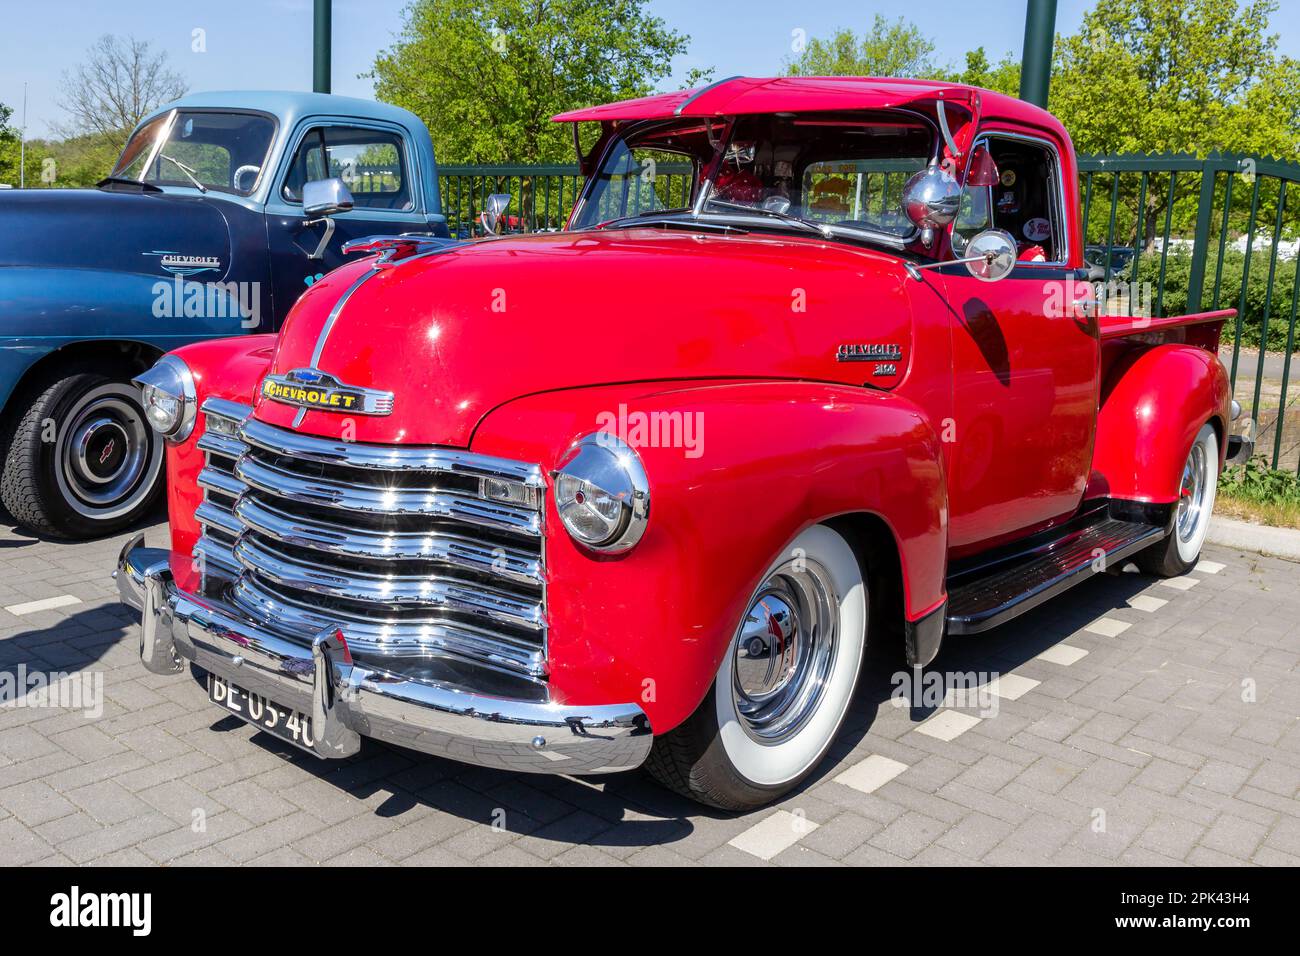 1951 Chevrolet 3100 Pickup classic truck on the parking lot. Rosmalen, The Netherlands - May 8, 2016 Stock Photo